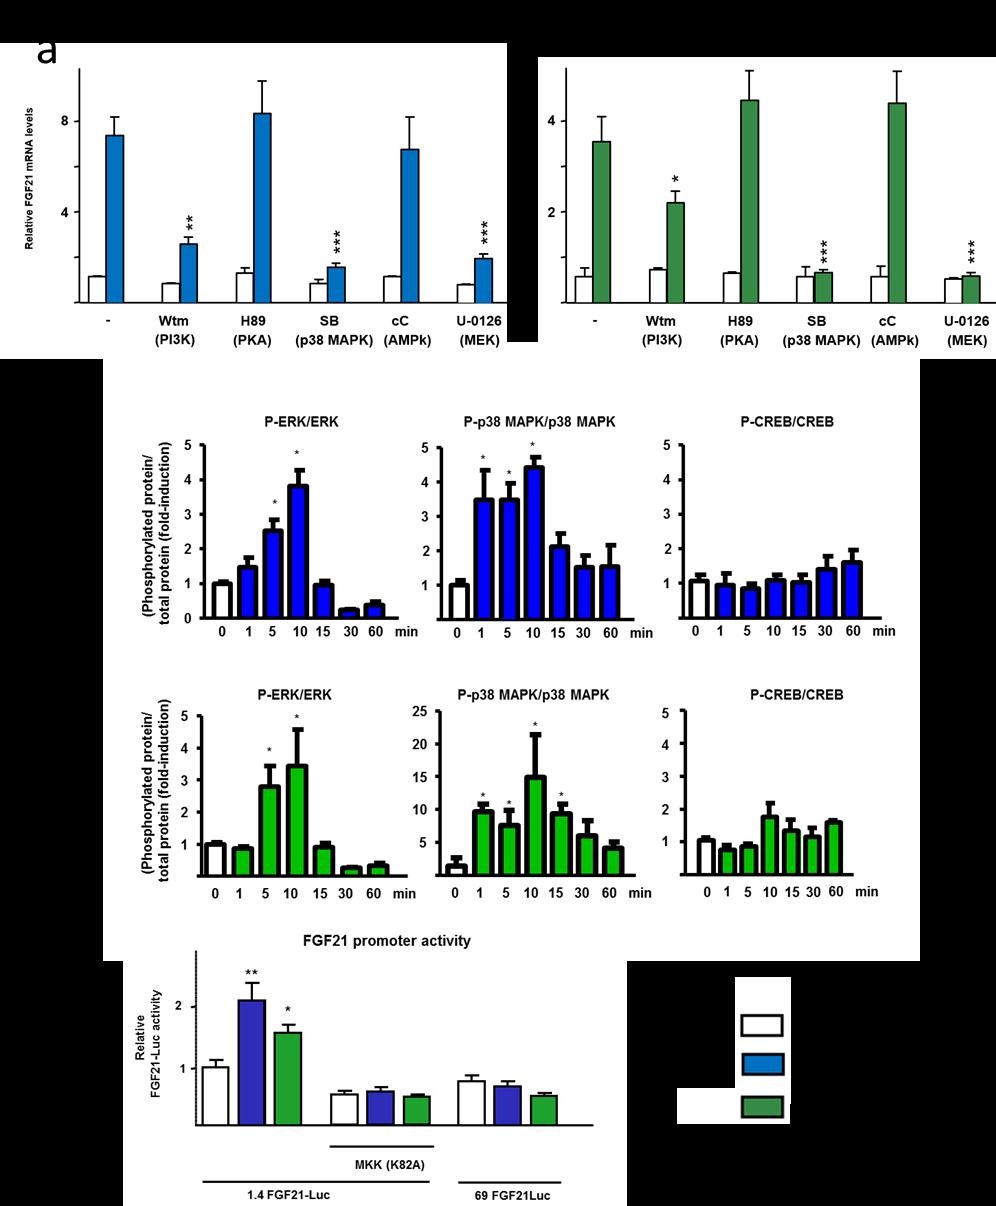 Supplementary Figure 9. Effects of GW9508 or EPA on FGF21 mrna expression in the presence of kinases inhibitors, phosphorylation of regulatory kinases, and FGF21 gene promoter activity.